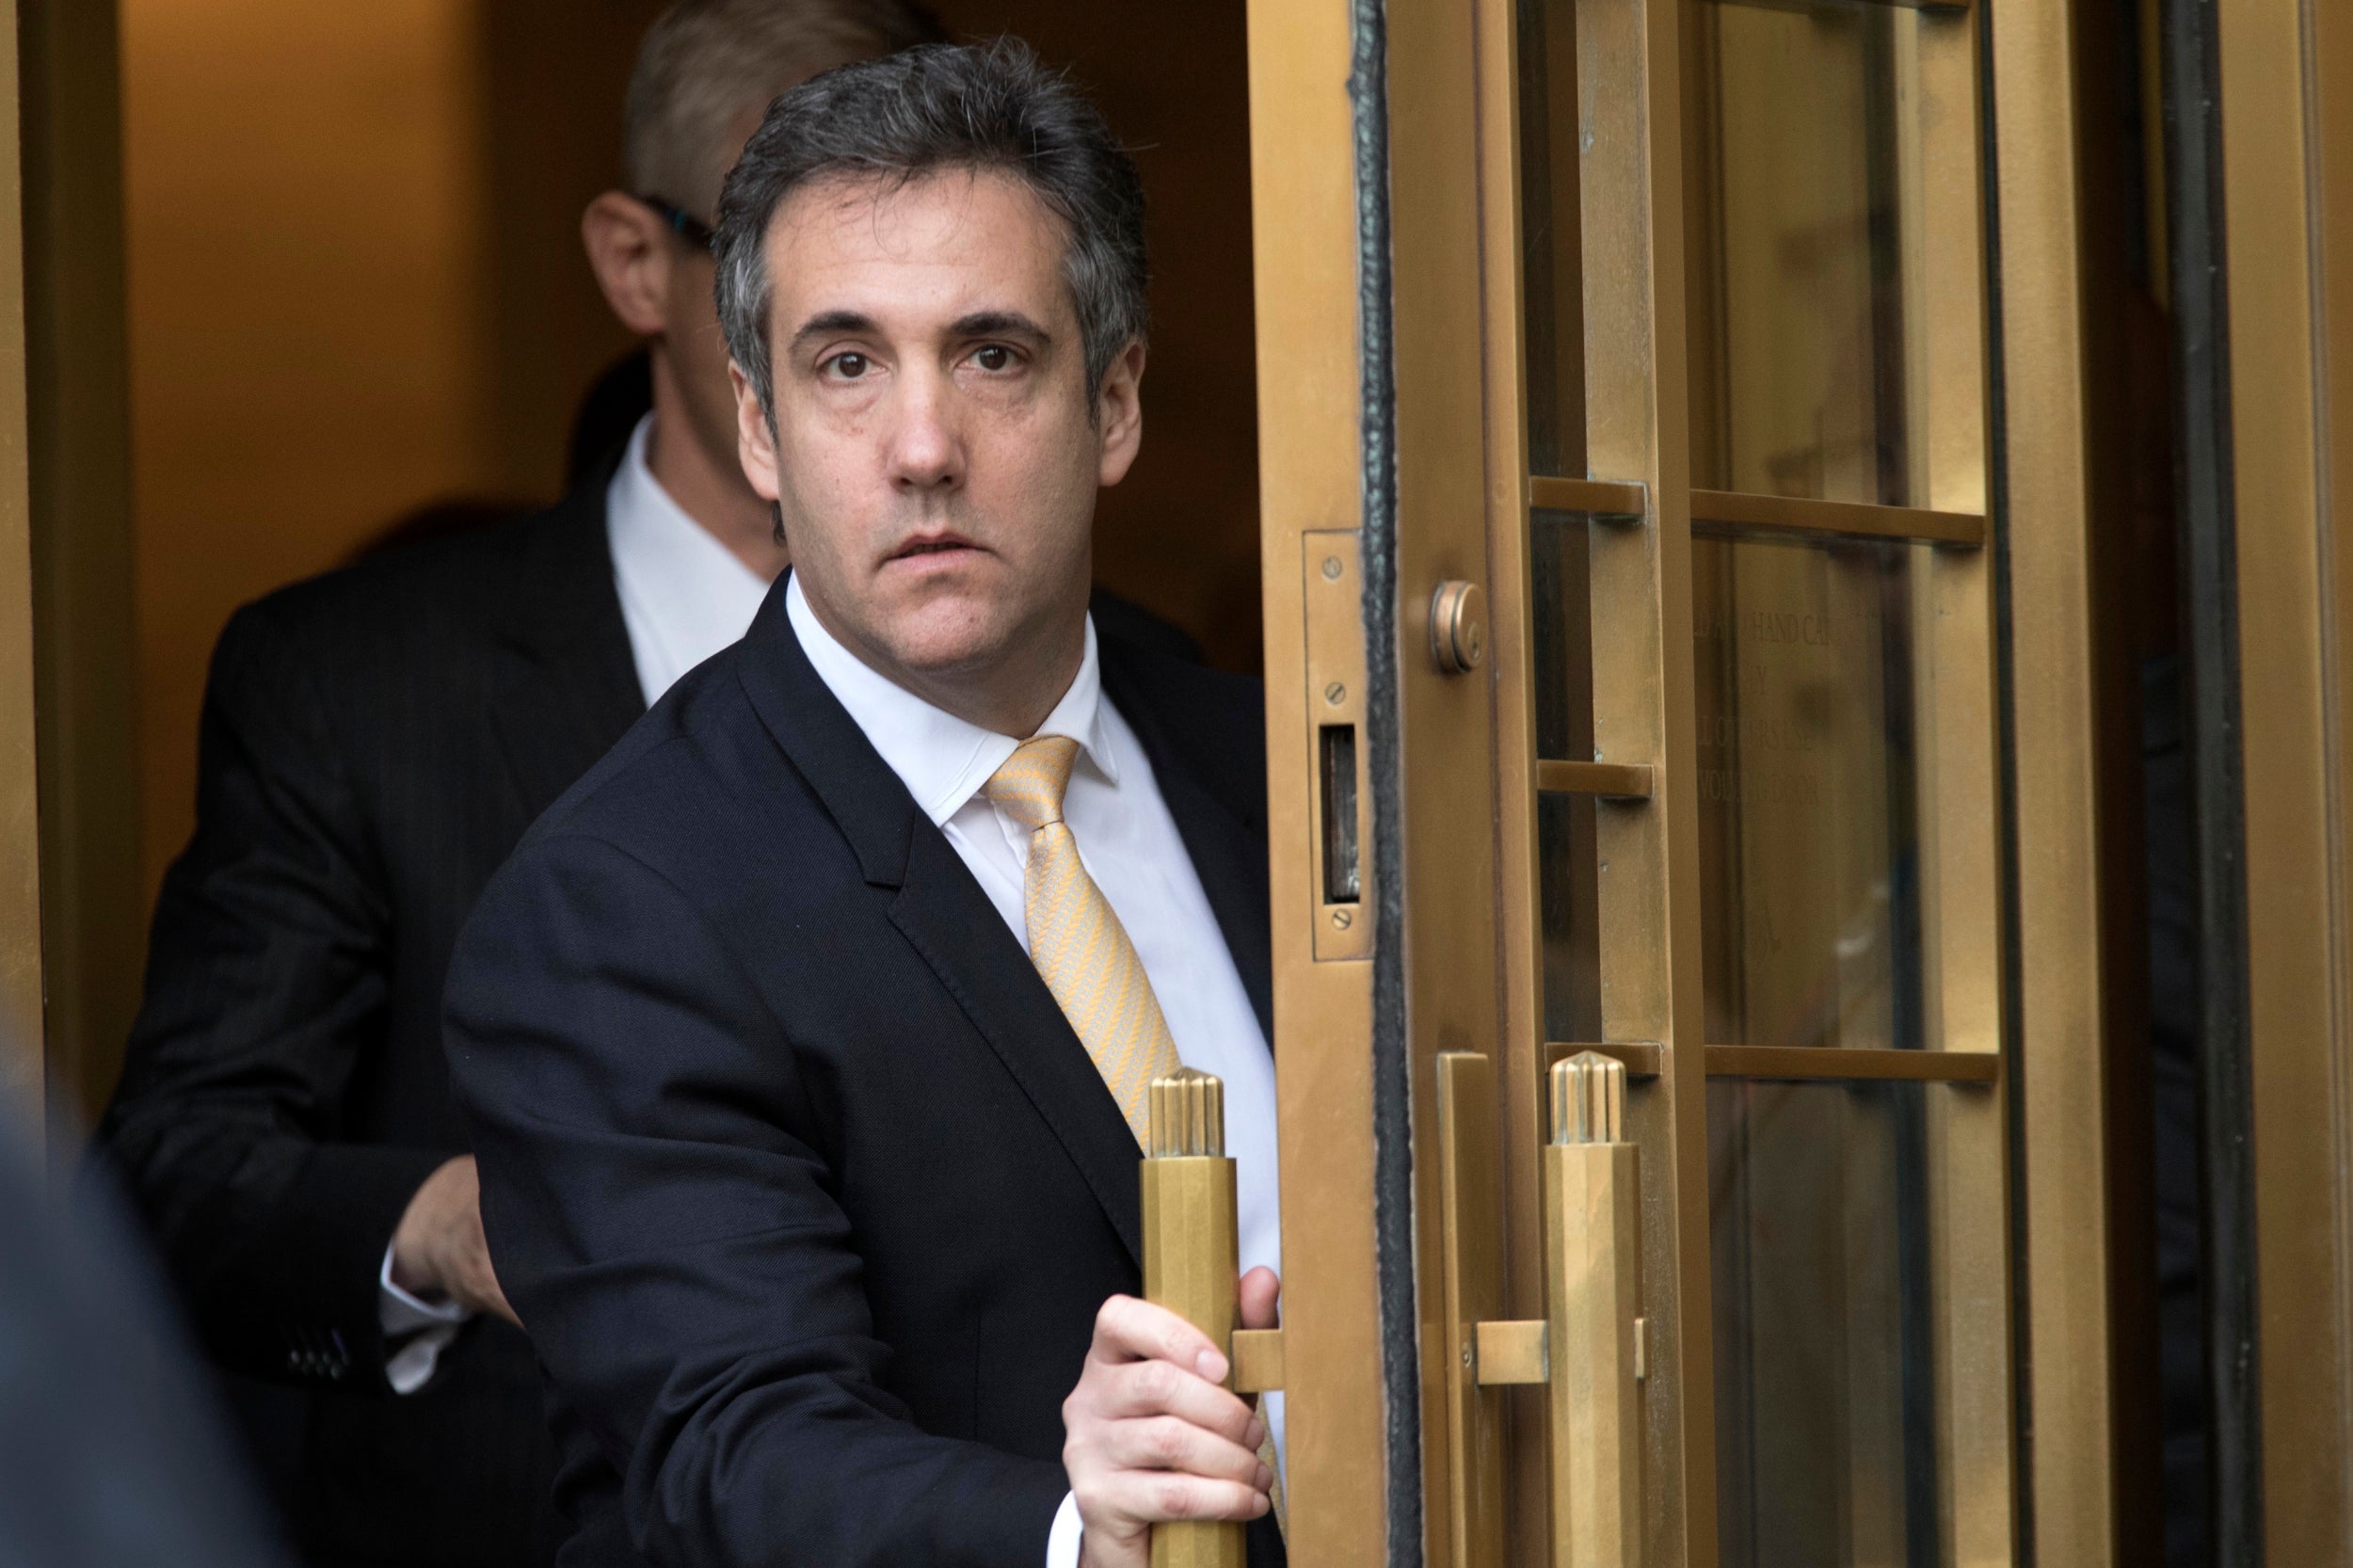 Michael Cohen's lawyer says he will not accept pardon from 'criminal' Donald Trump